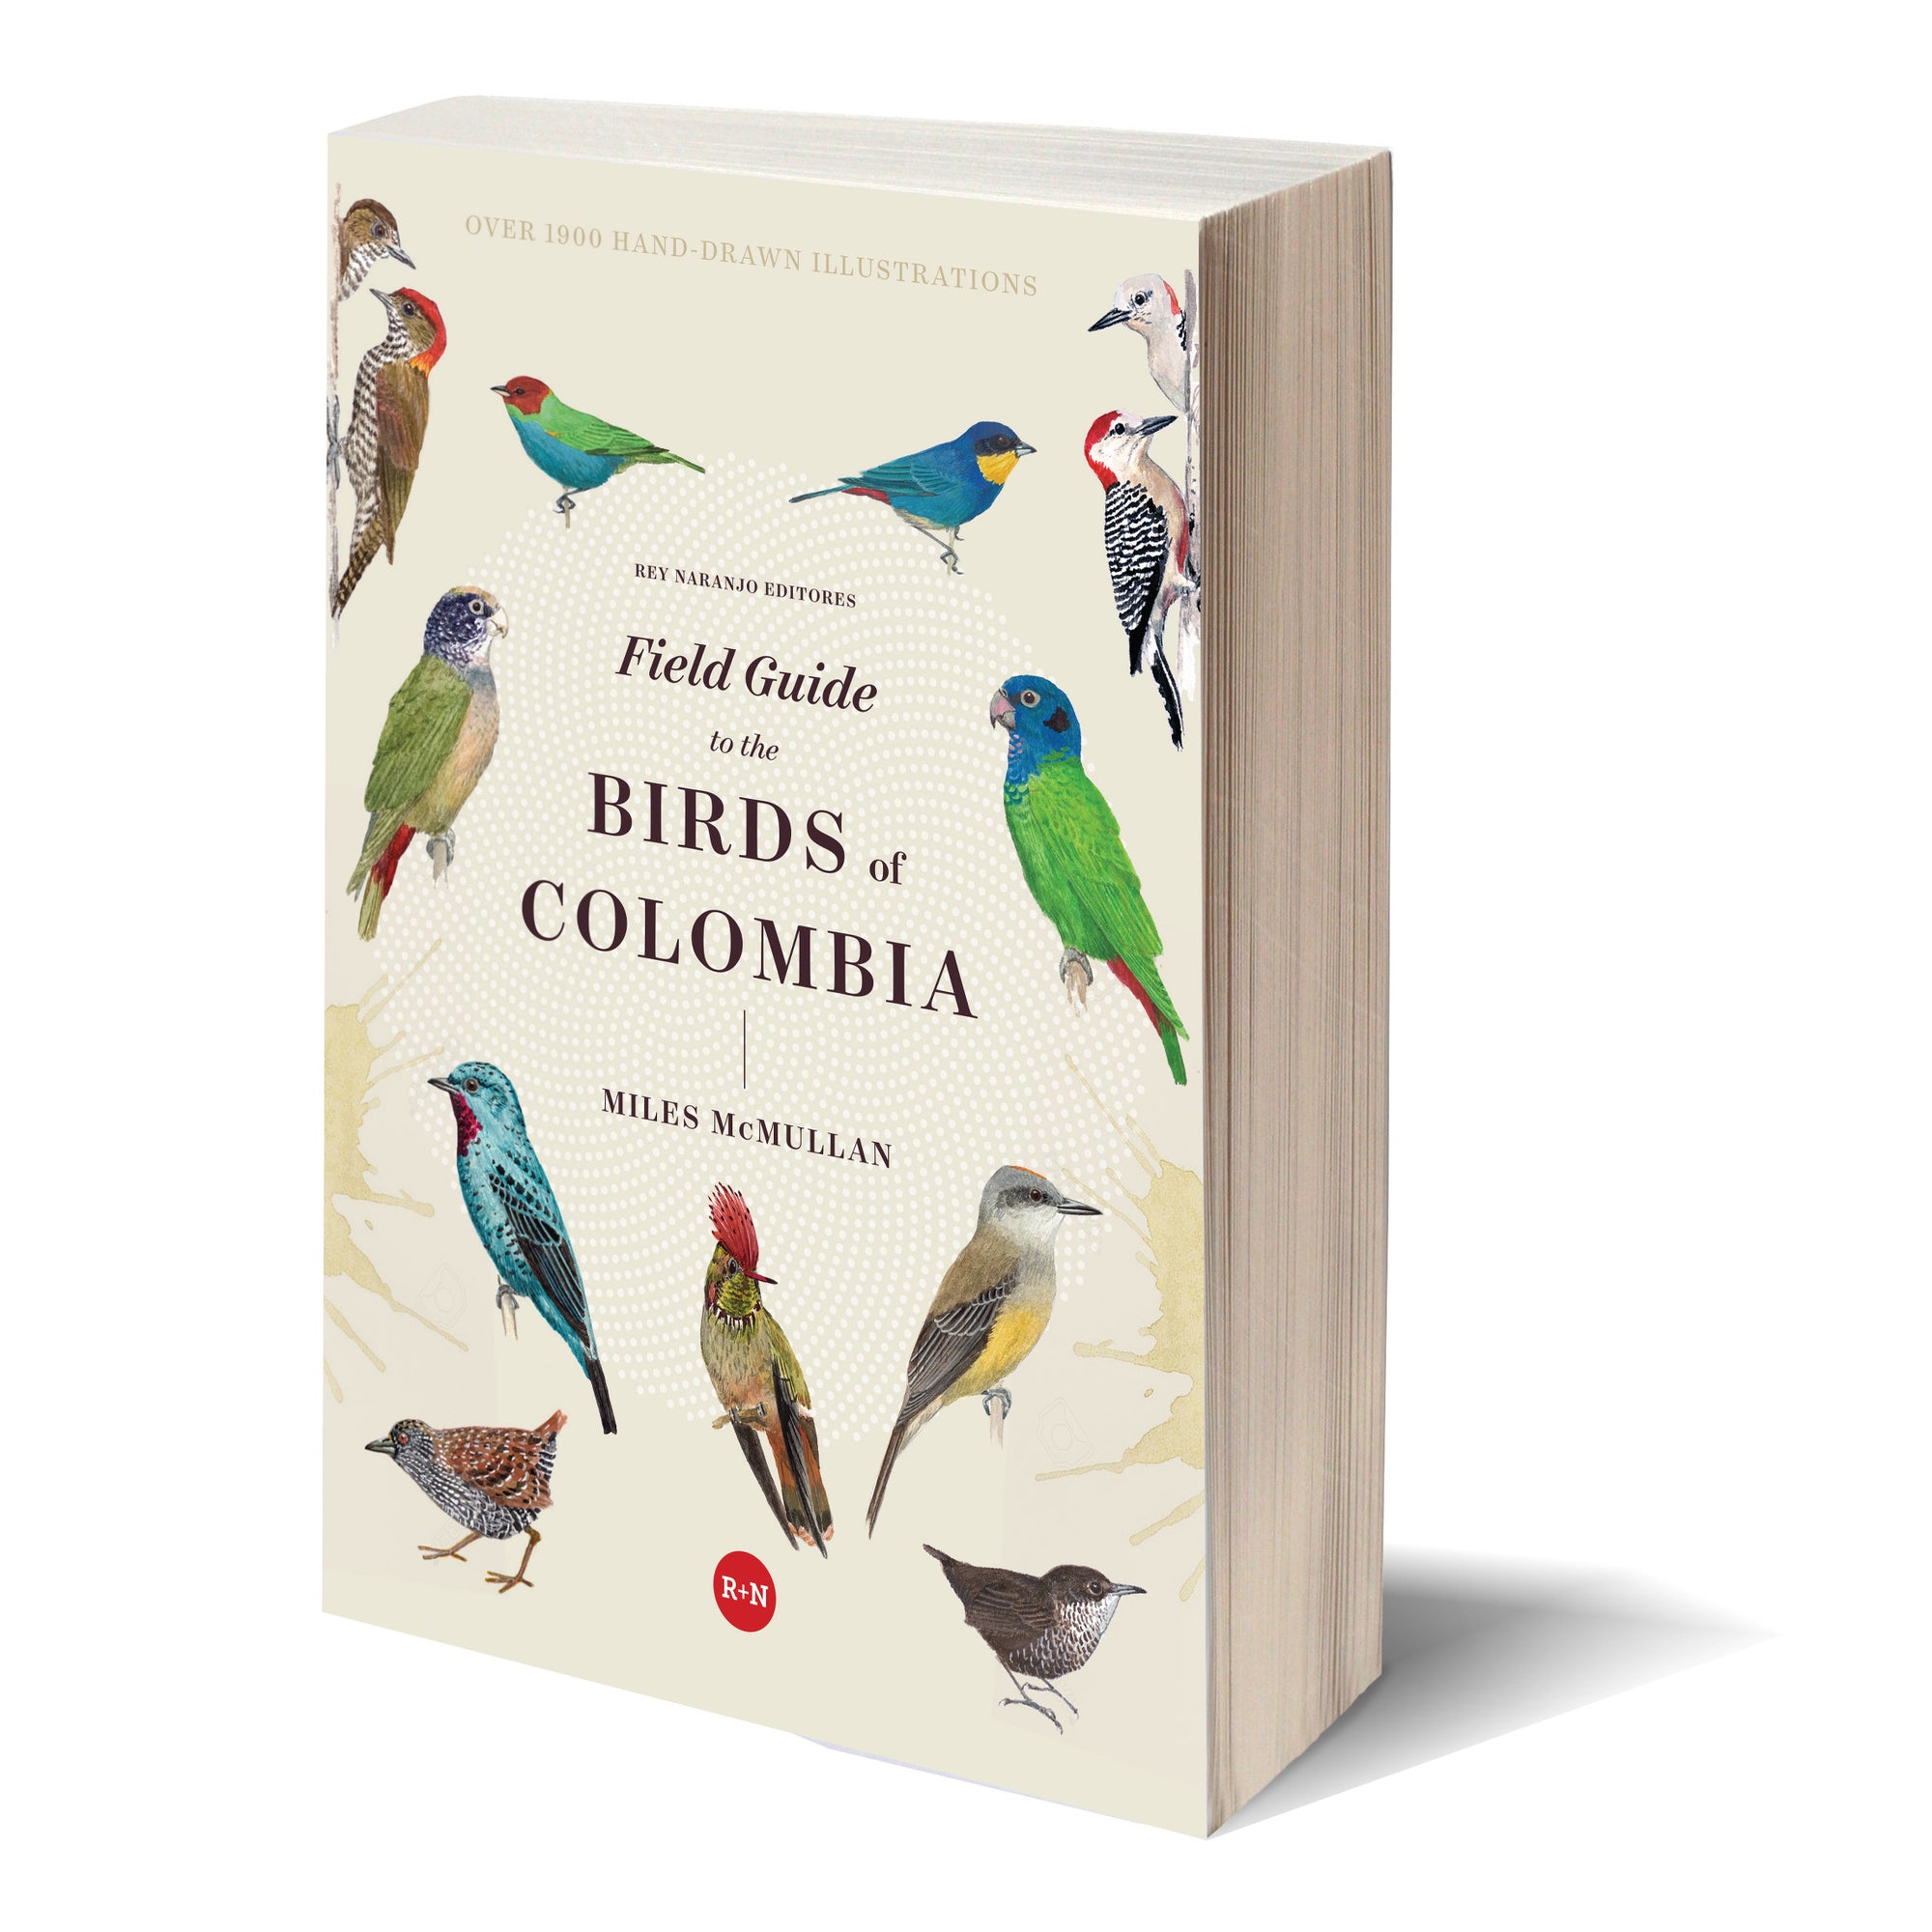 Field Guide to the Birds of Colombia, Third Edition.